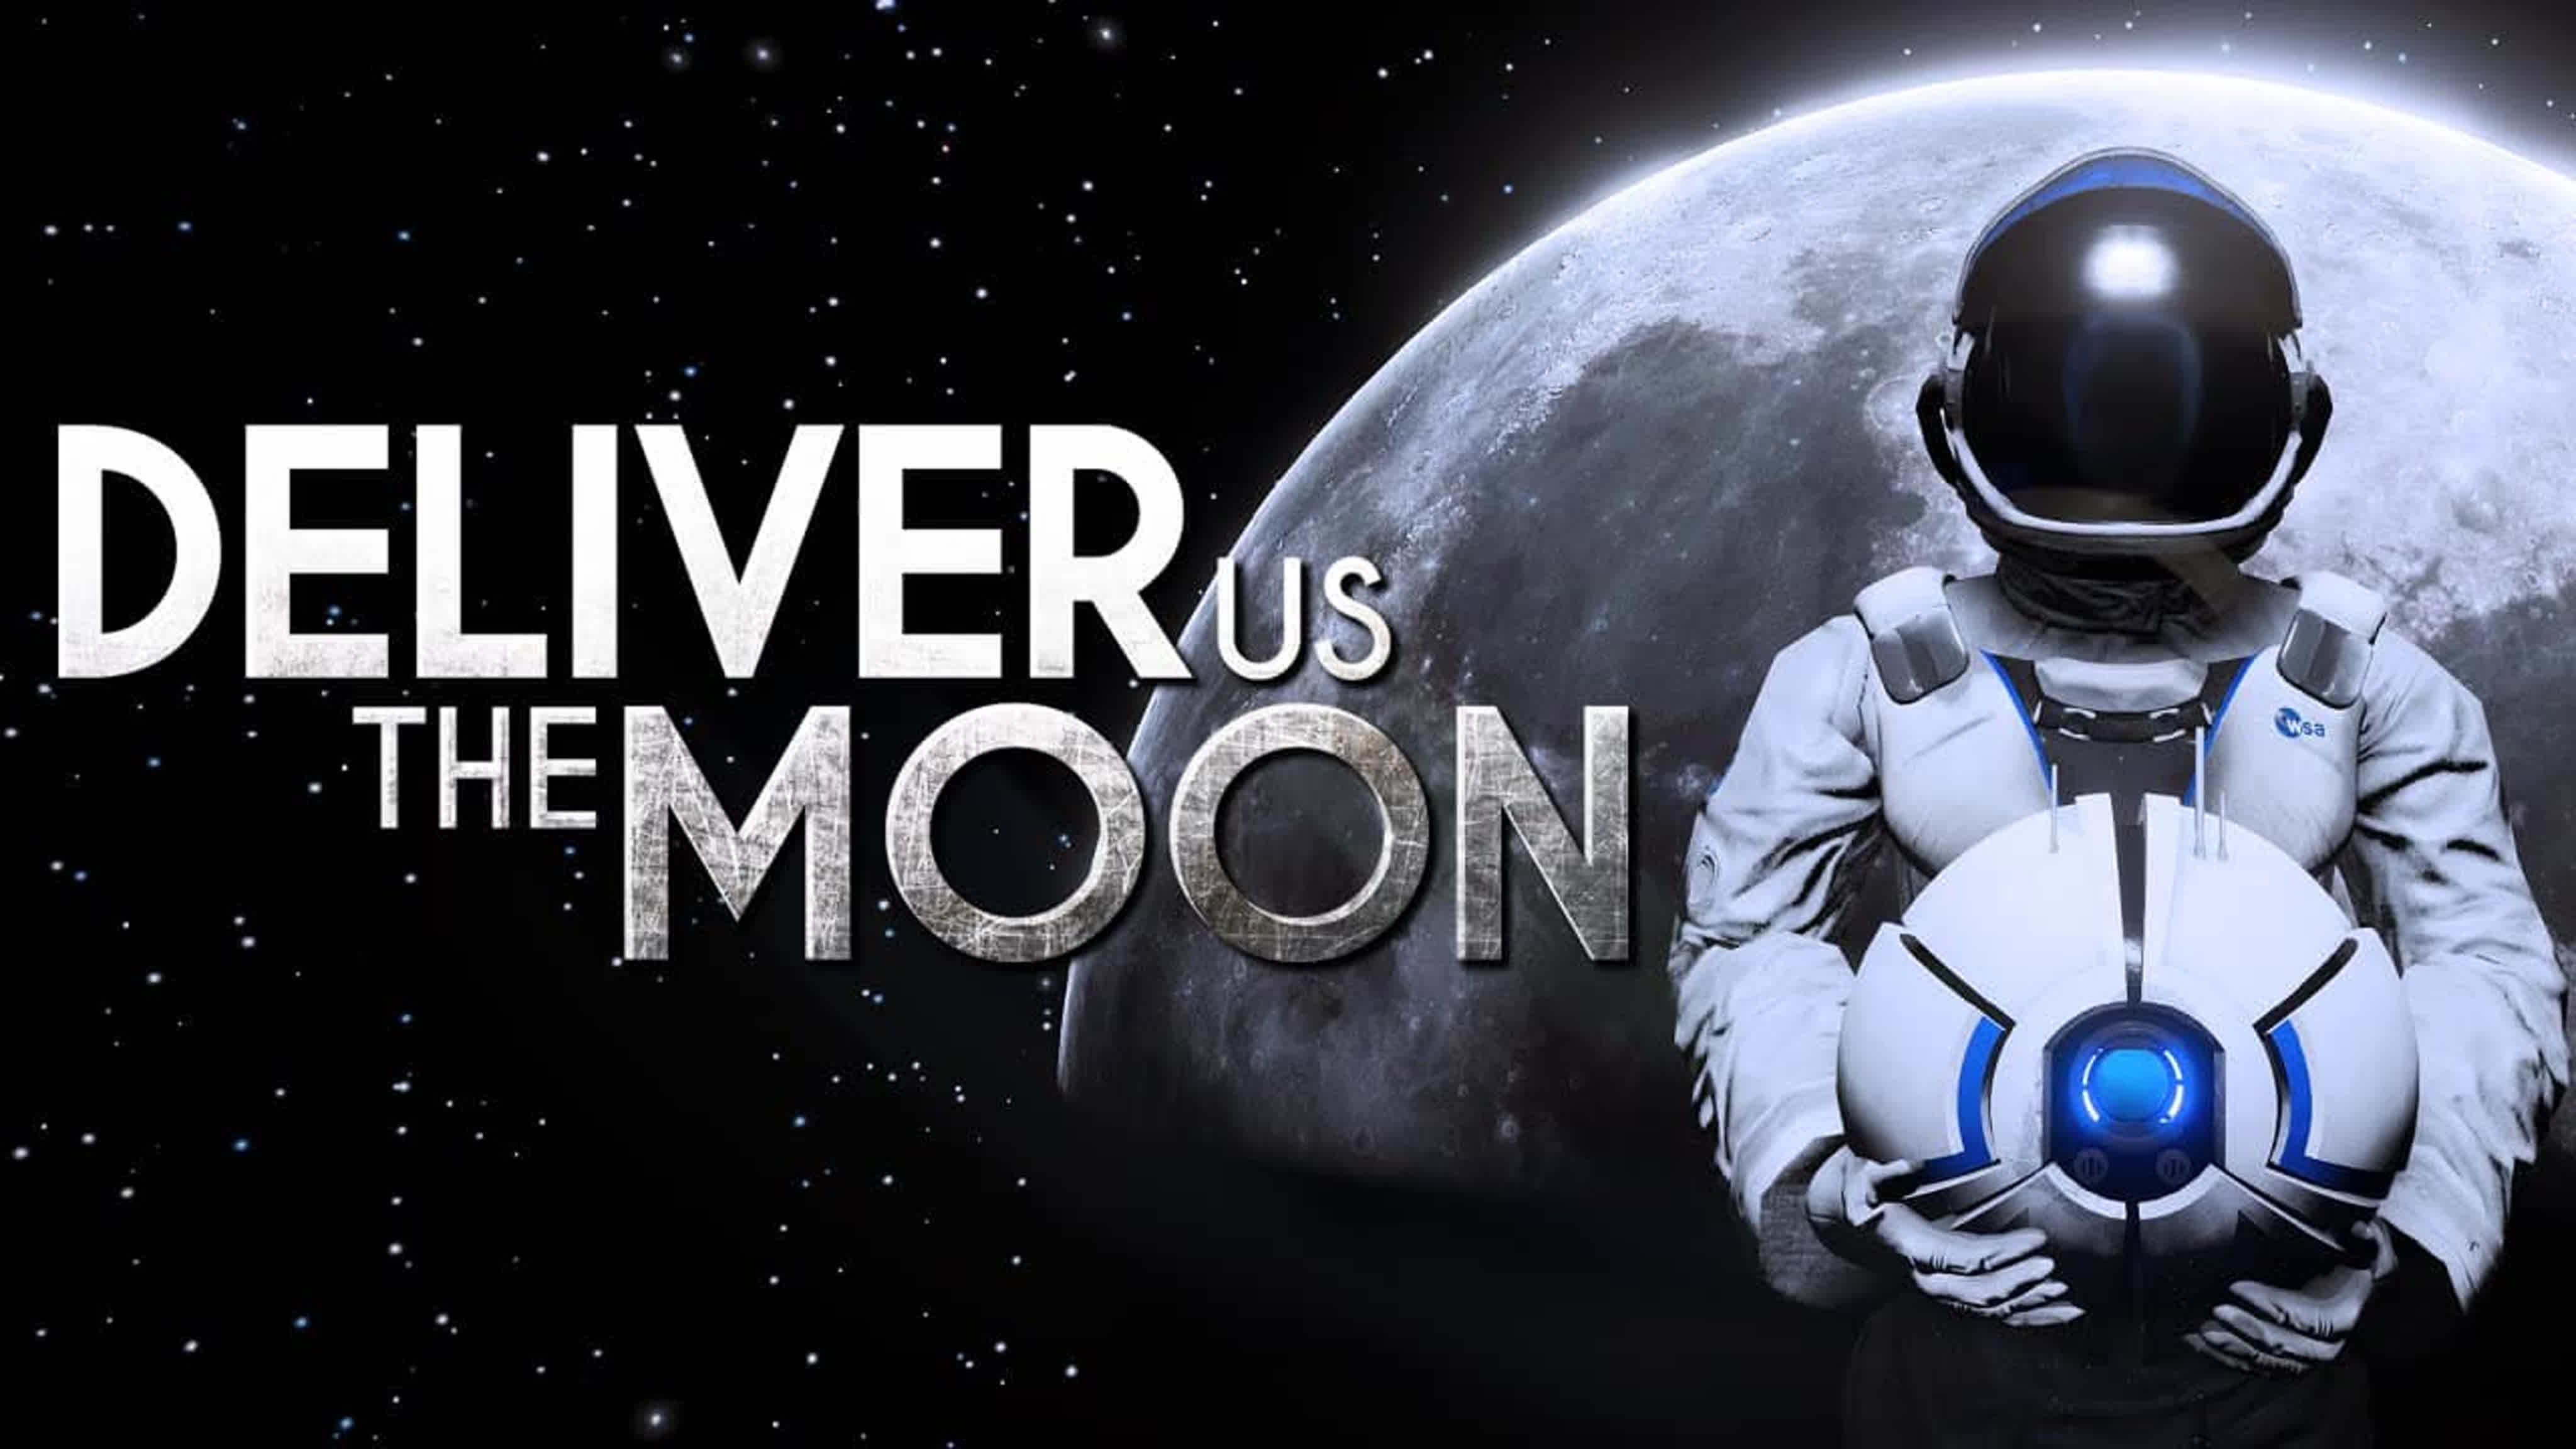 Moon pc. Deliver us the Moon. The Moon игра. Deliver us the Moon обложка. Deliver us the Moon обзор.